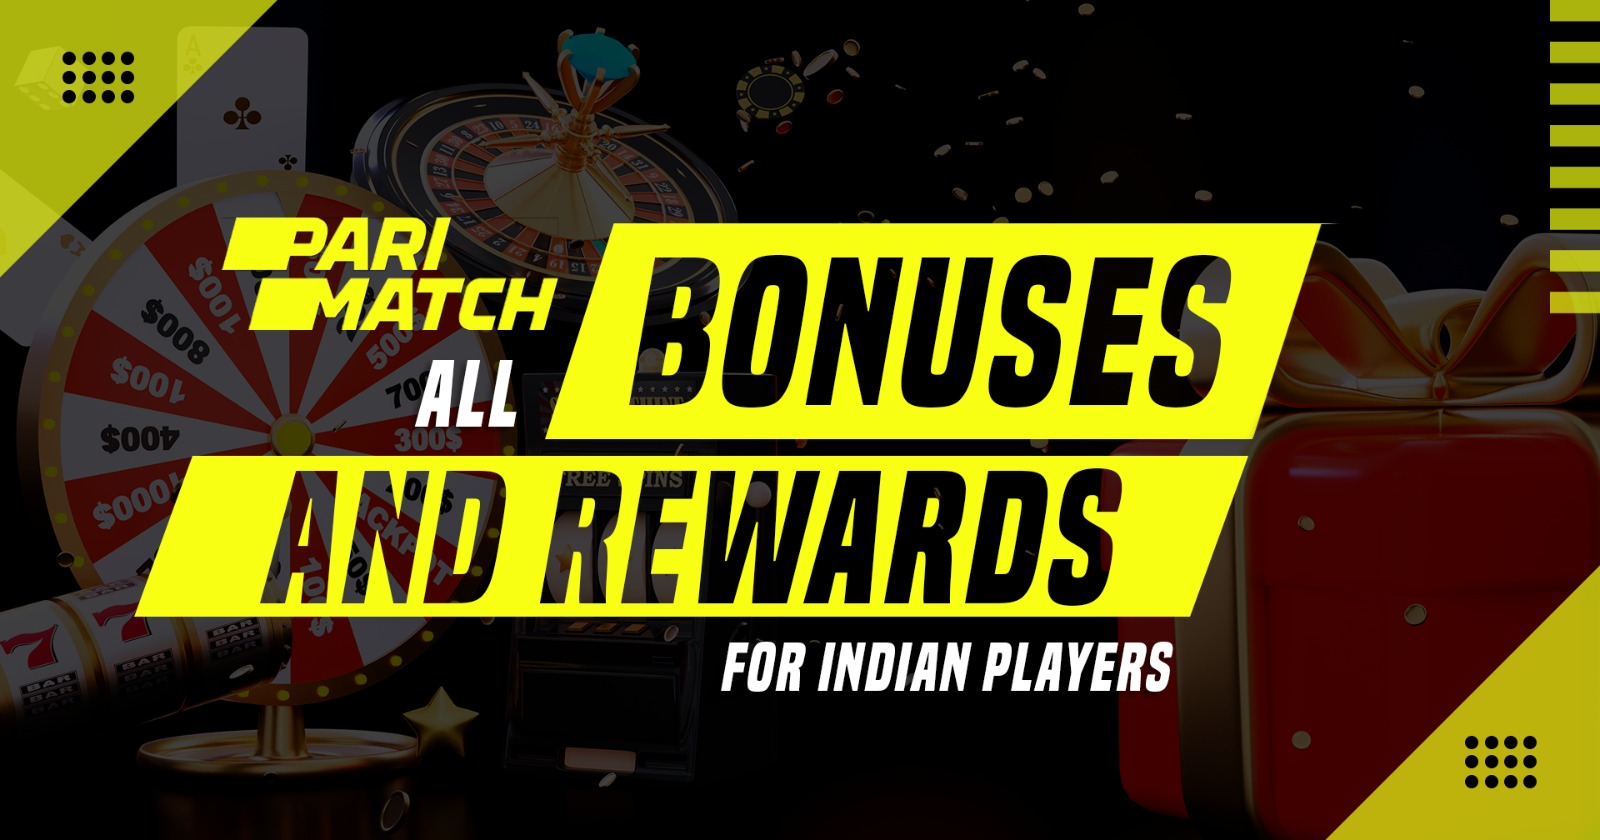 Parimatch All Bonuses and Rewards for Indian Players